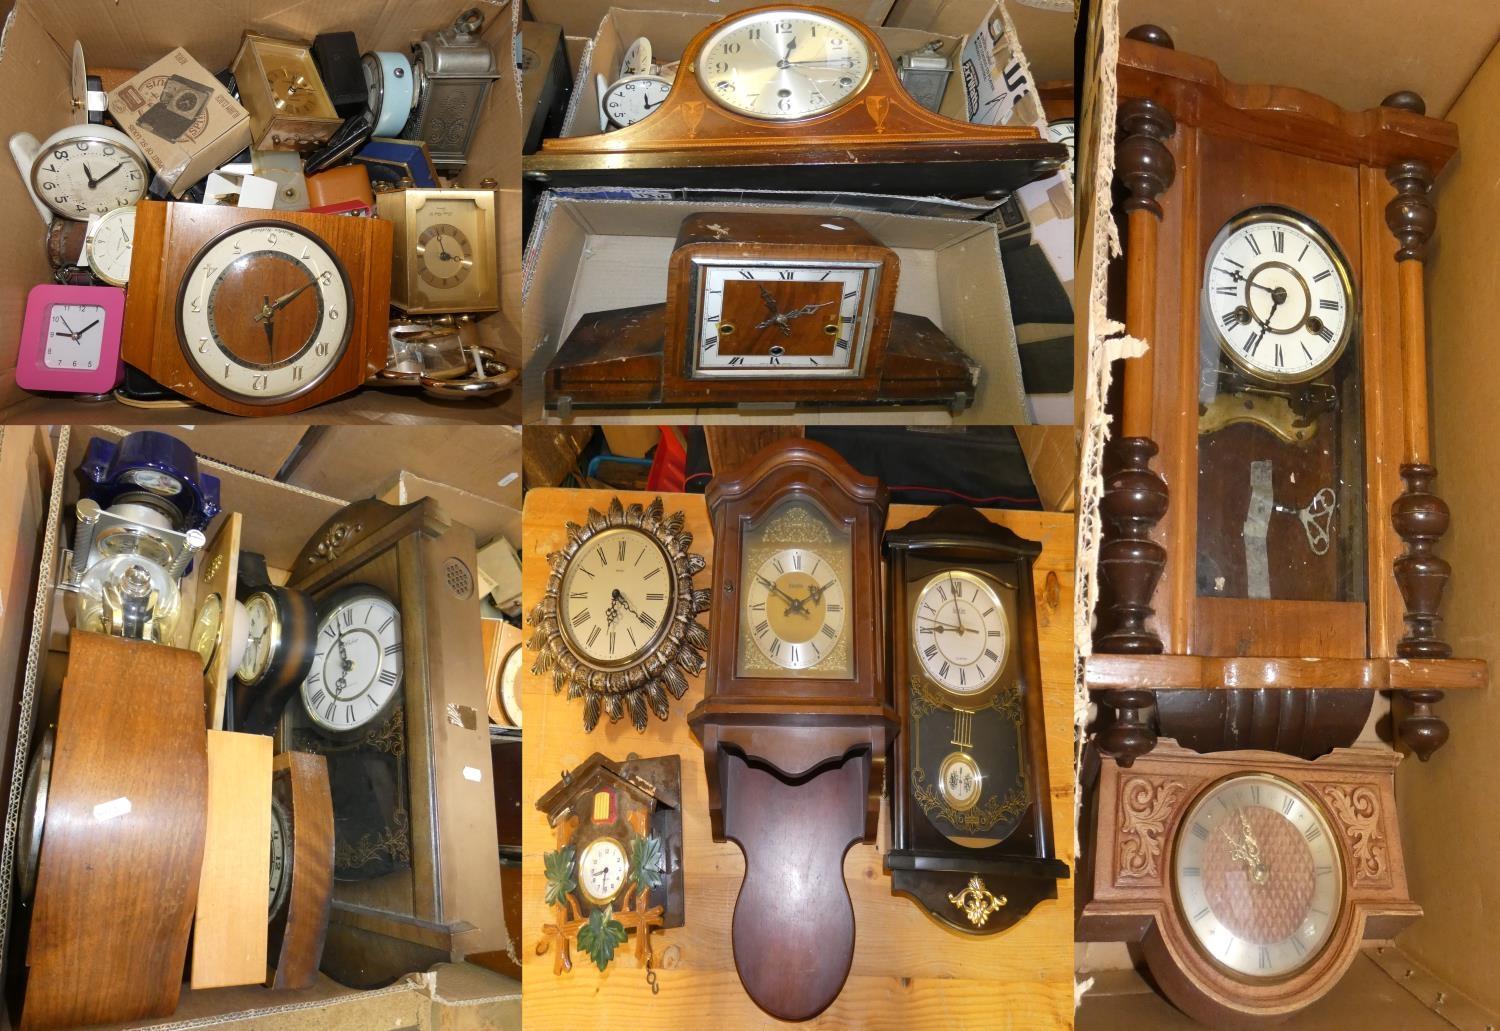 Wall, mantle, alarm and carriage clocks including a Teasmaid in 5 boxes.